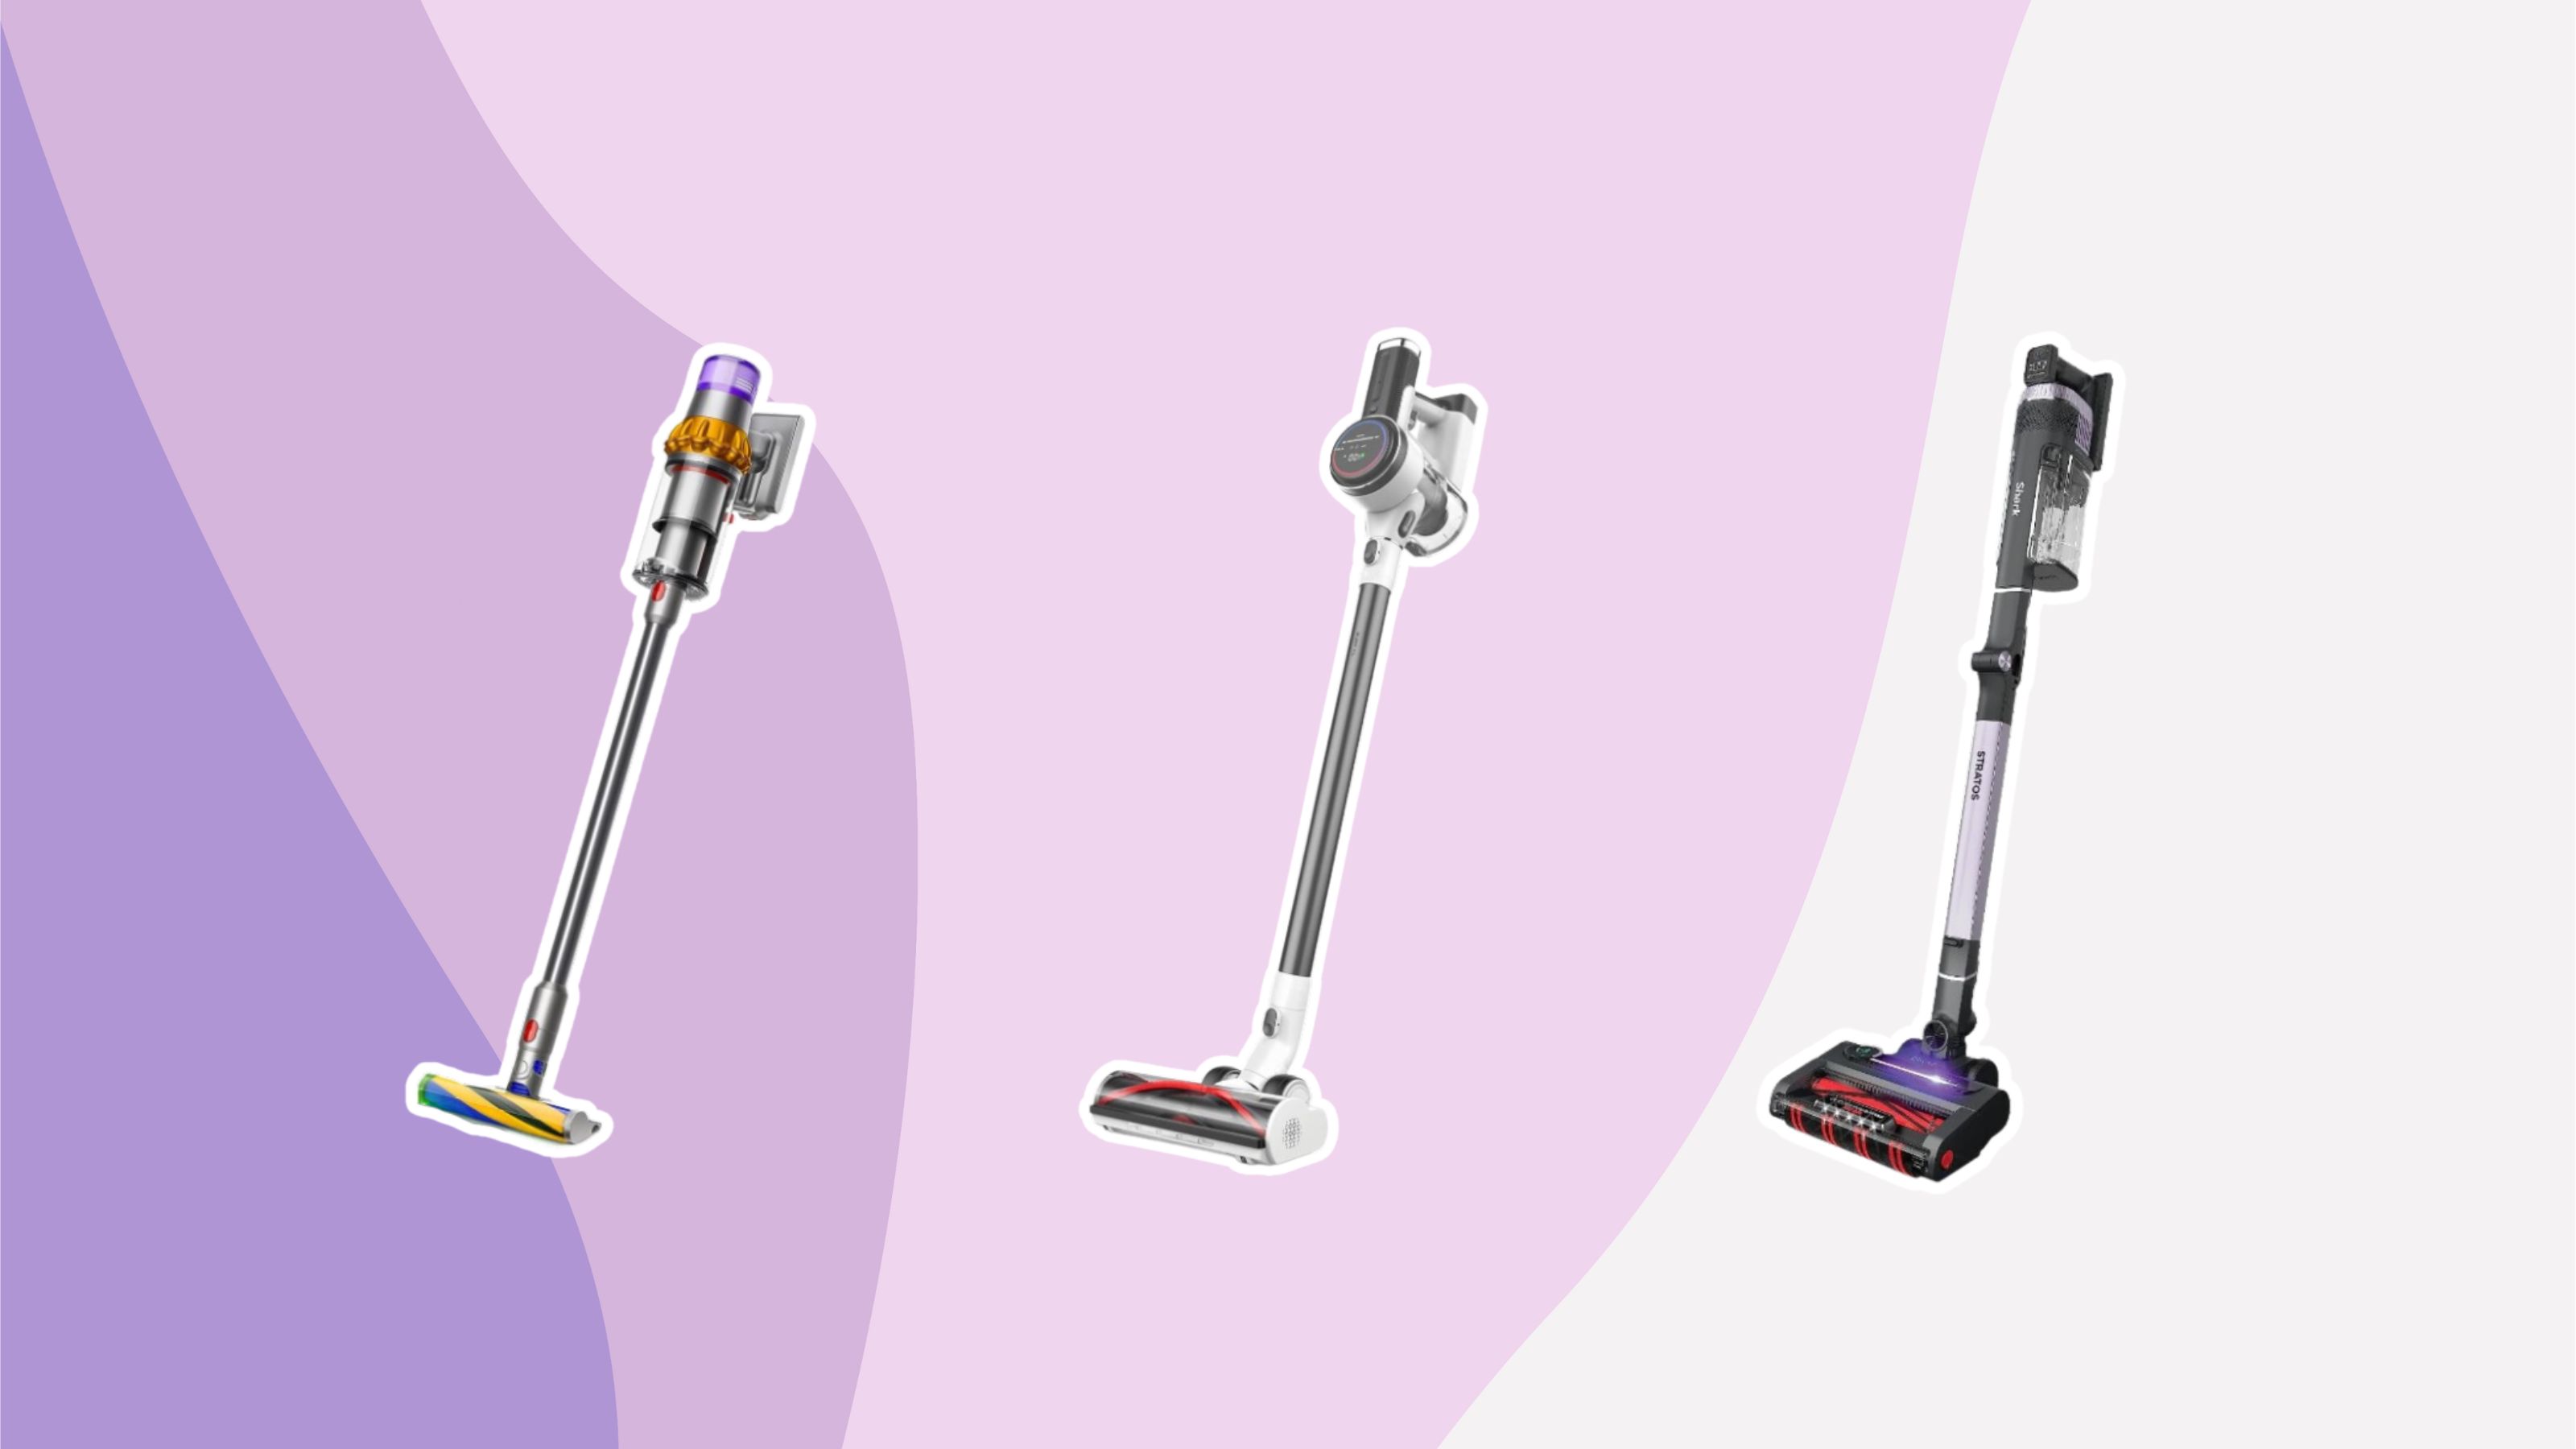 This 'Lightweight' Cordless Vacuum Is Marked Down to $99 at